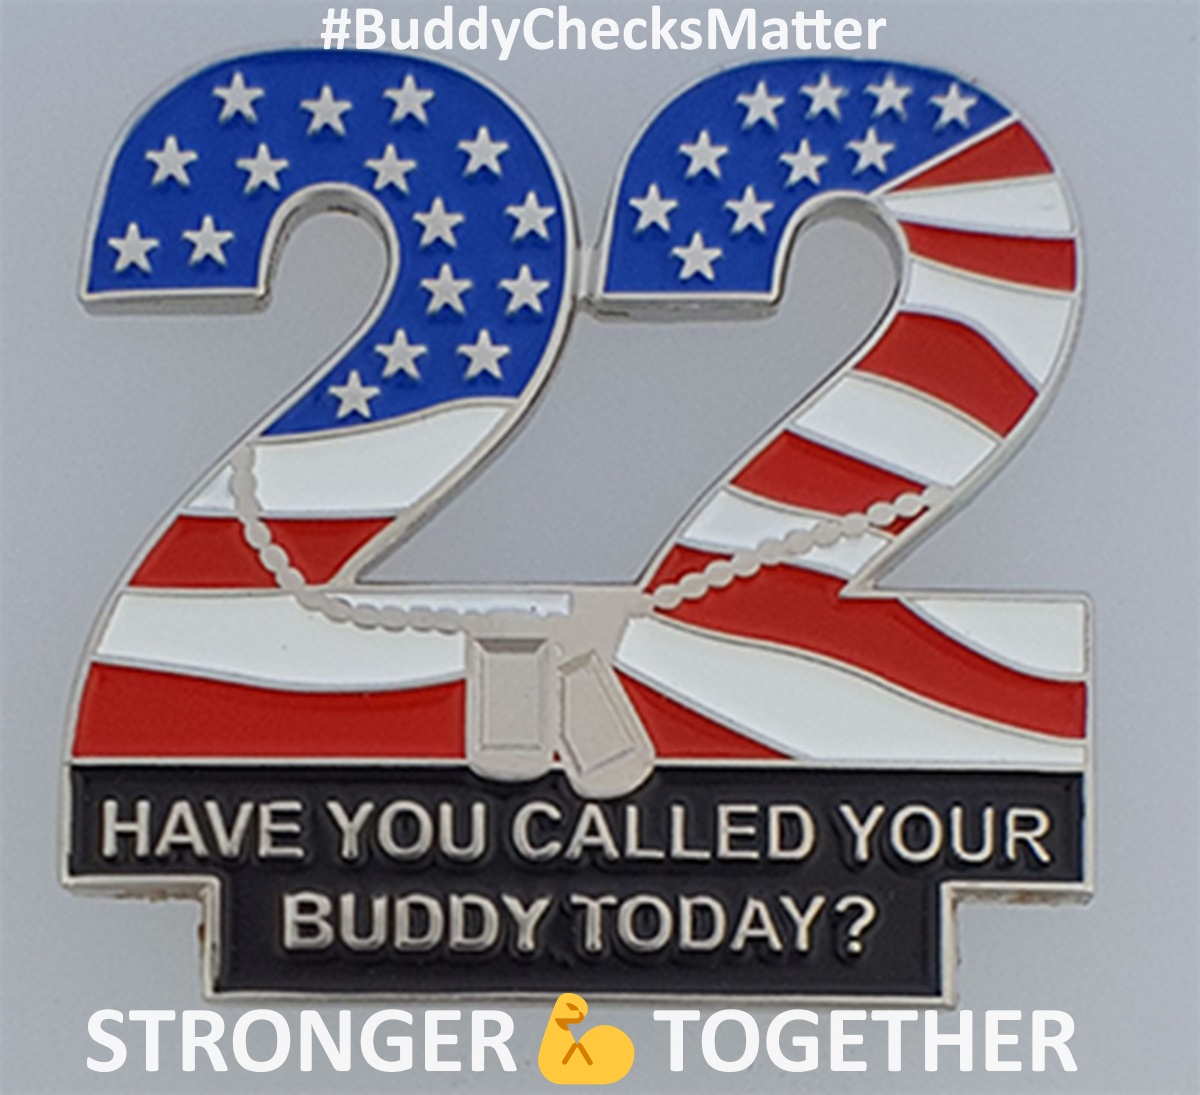 @okhomebody @SignalSoldierX1 @MaxxisWolf @TimEvan06955362 @proud_veteran66 @DirtDart3 @AultGt @chris1973hunter @Renewnee67 🇺🇸👊Stronger💪Together👊🇺🇸 A simple 'Repost' helps us to reach more Veterans🙏 Only together can we #EndVeteranSuicide 💪🇺🇸 🇺🇸 #BuddyChecksMatter 🇺🇸 Hope everyone has a good day🙏 Always reach out first. Together we can #turn22to0 💪🇺🇸 🇺🇸 🇺🇸🟢TY Charyl for #Buddy ✅👊🇺🇸